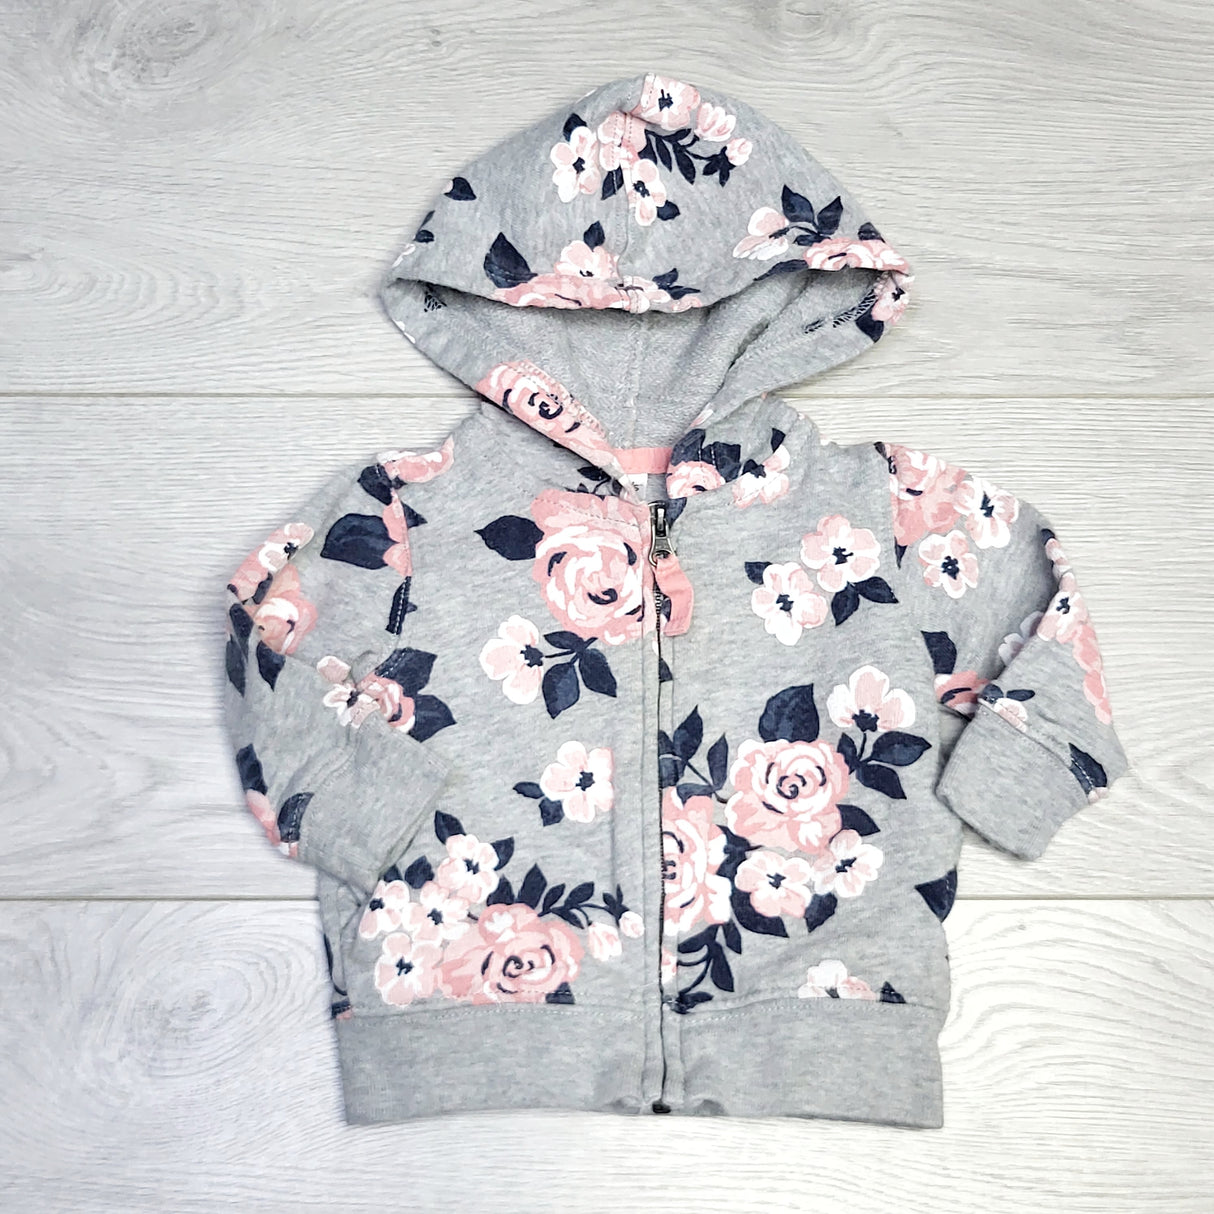 KJHN1 - Carters grey floral print zippered cotton hoodie. Size 3 months